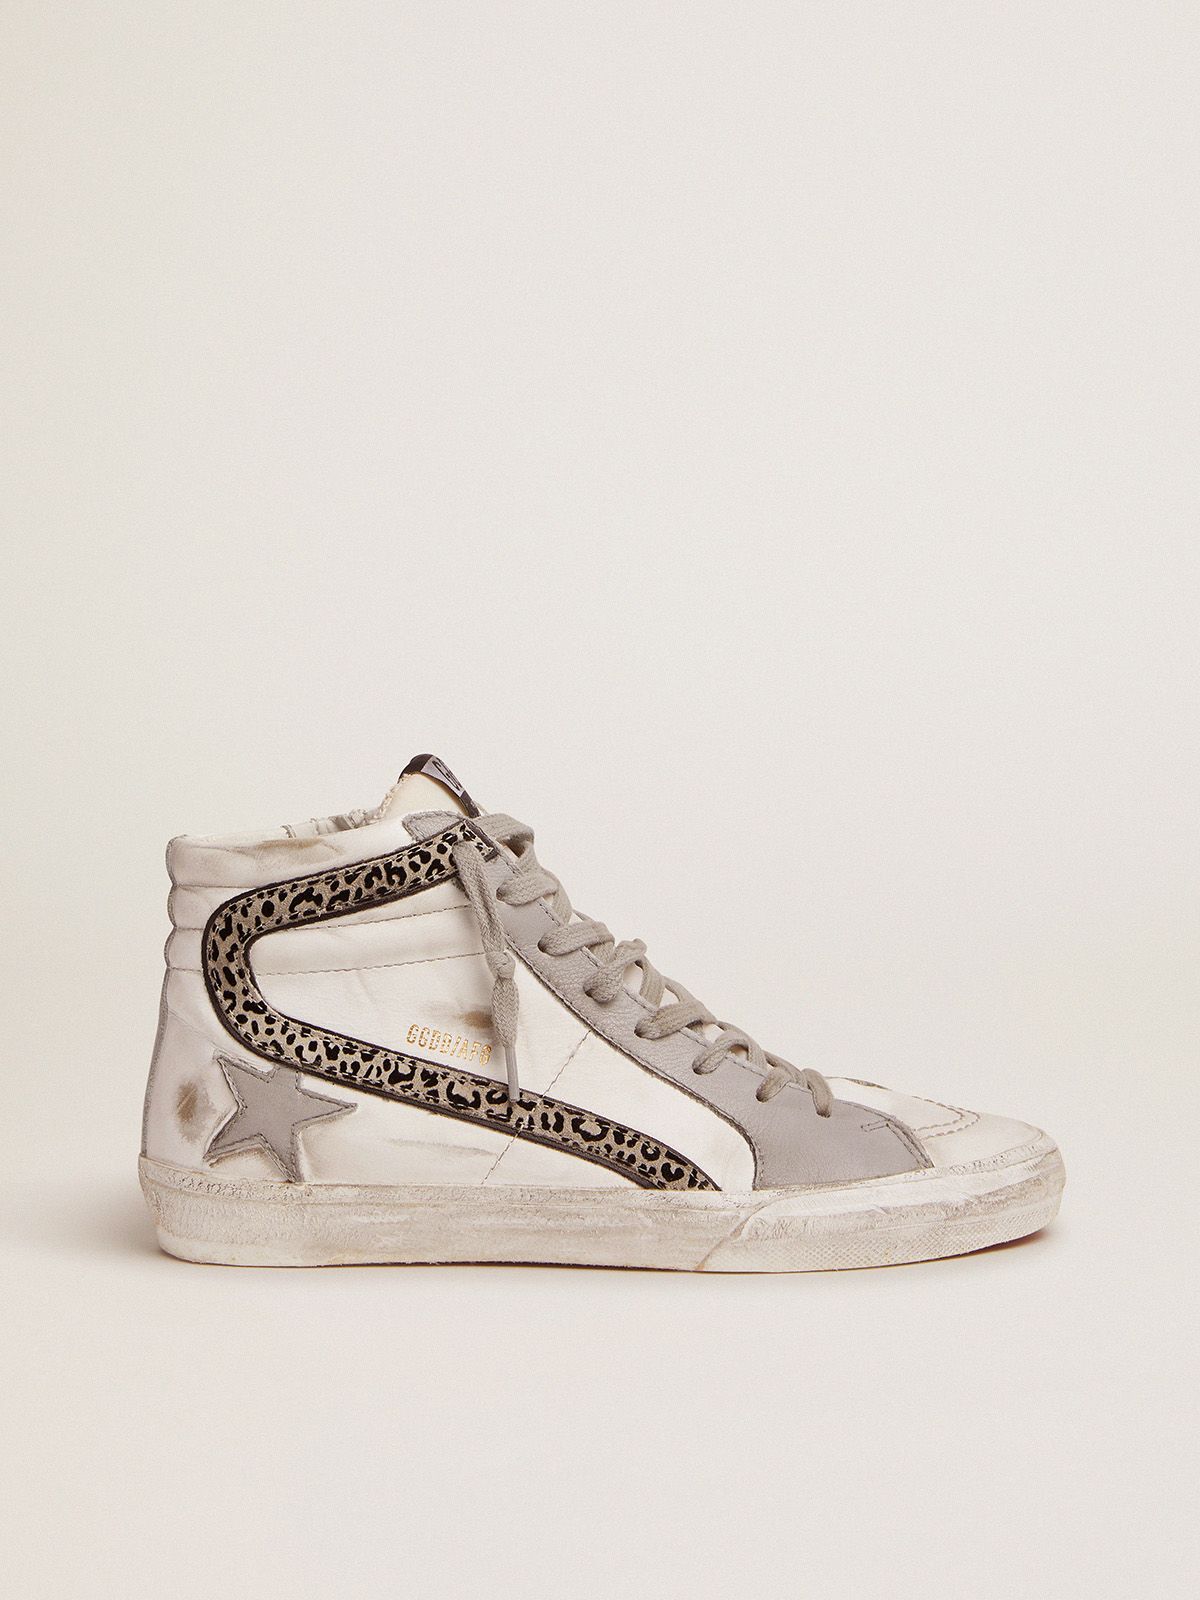 golden goose leather Slide suede sneakers upper and with flash gray white leopard-print